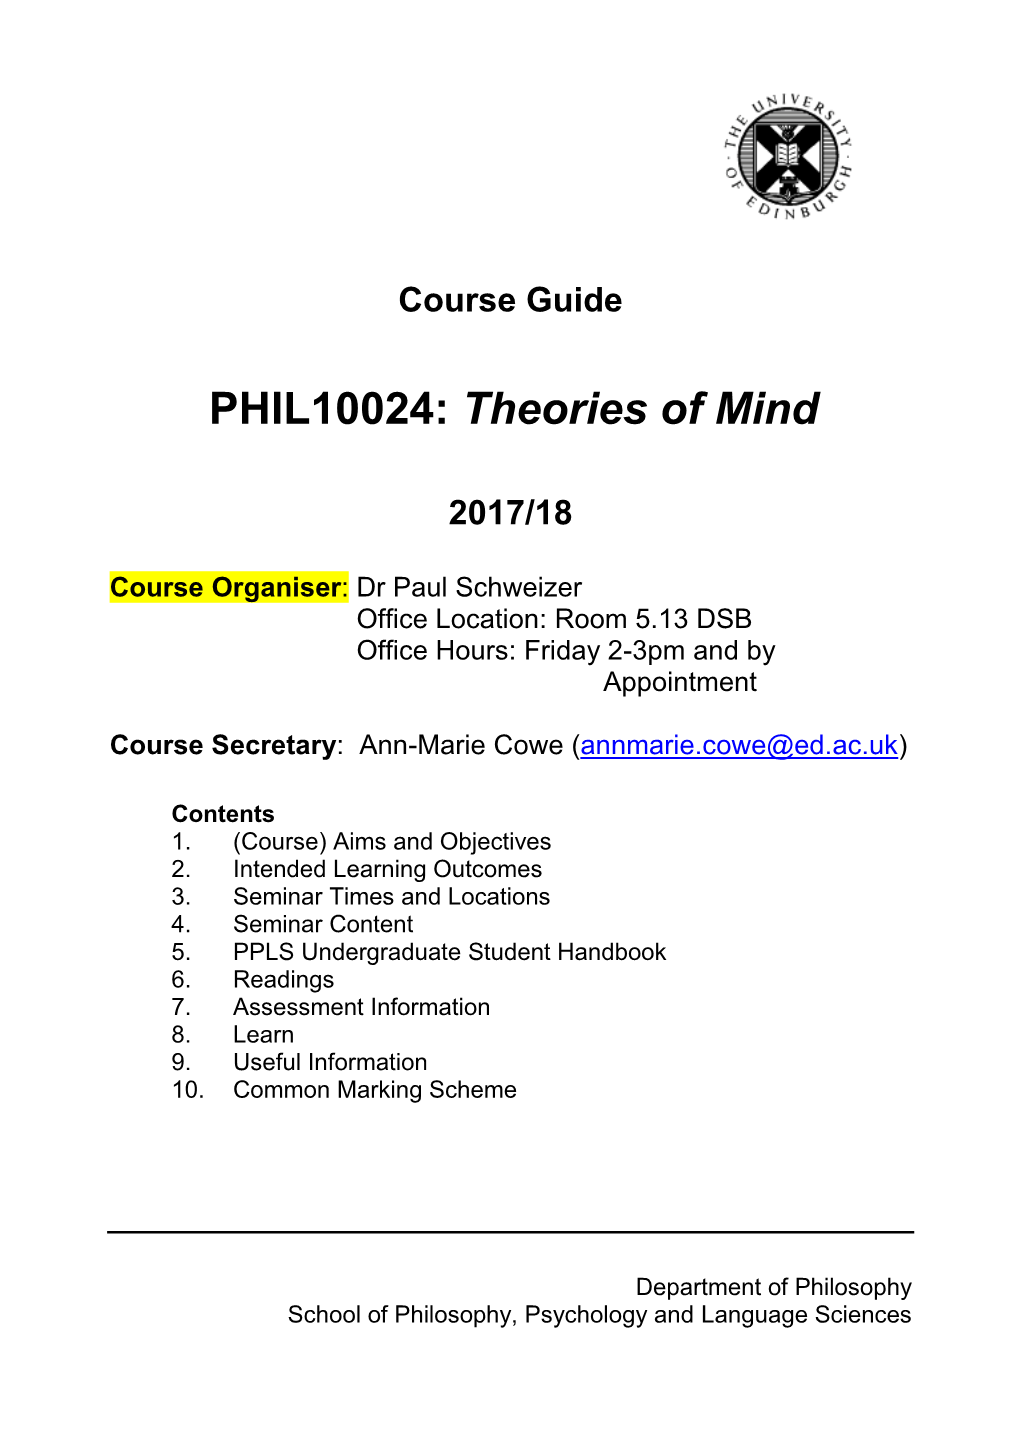 PHIL10024: Theories of Mind